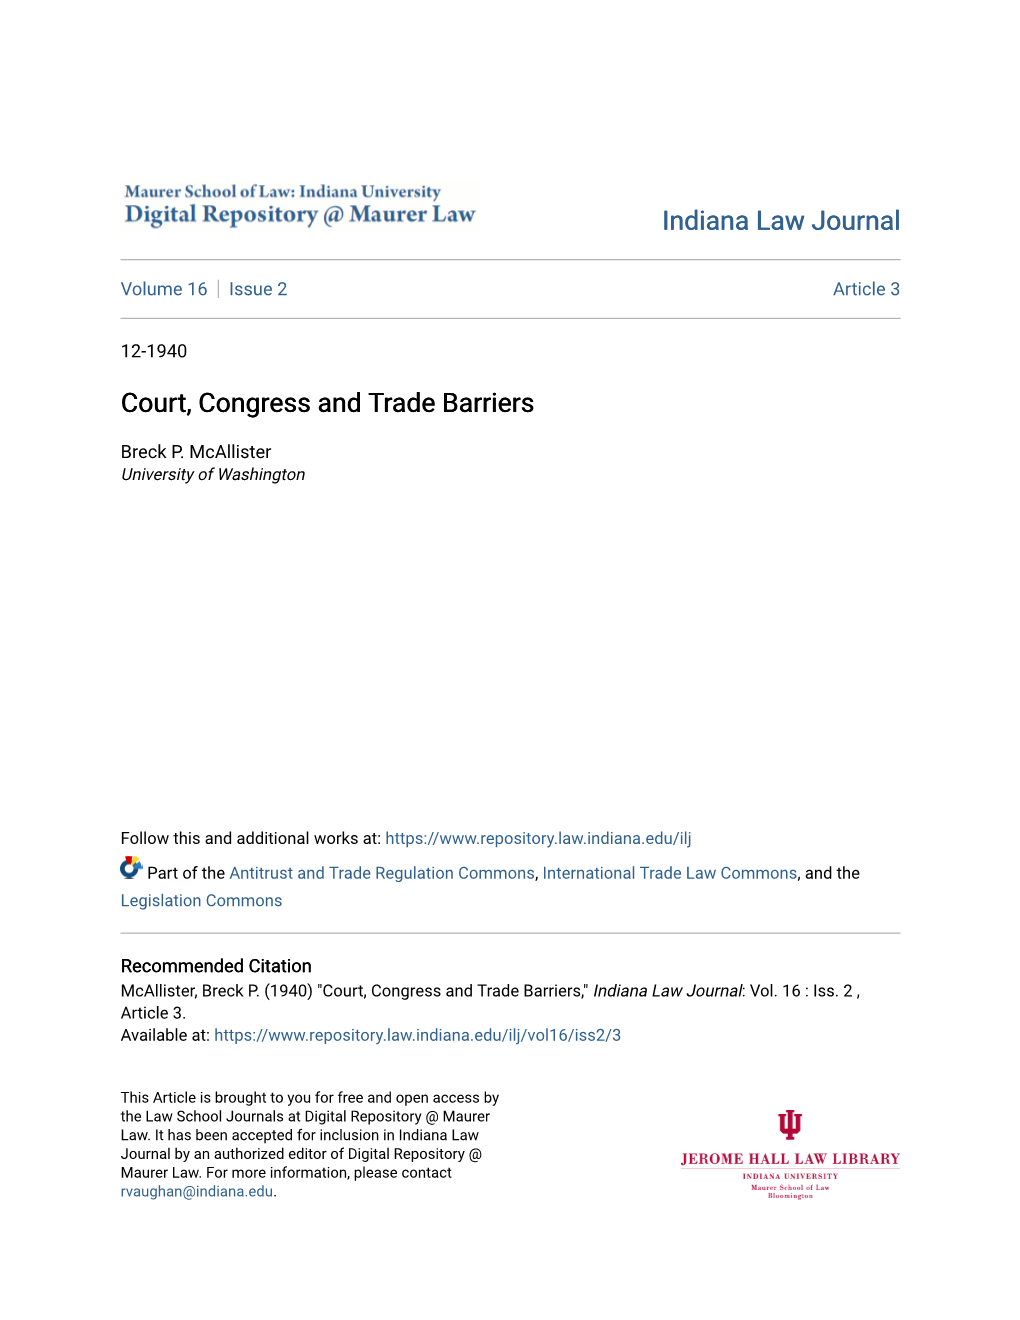 Court, Congress and Trade Barriers